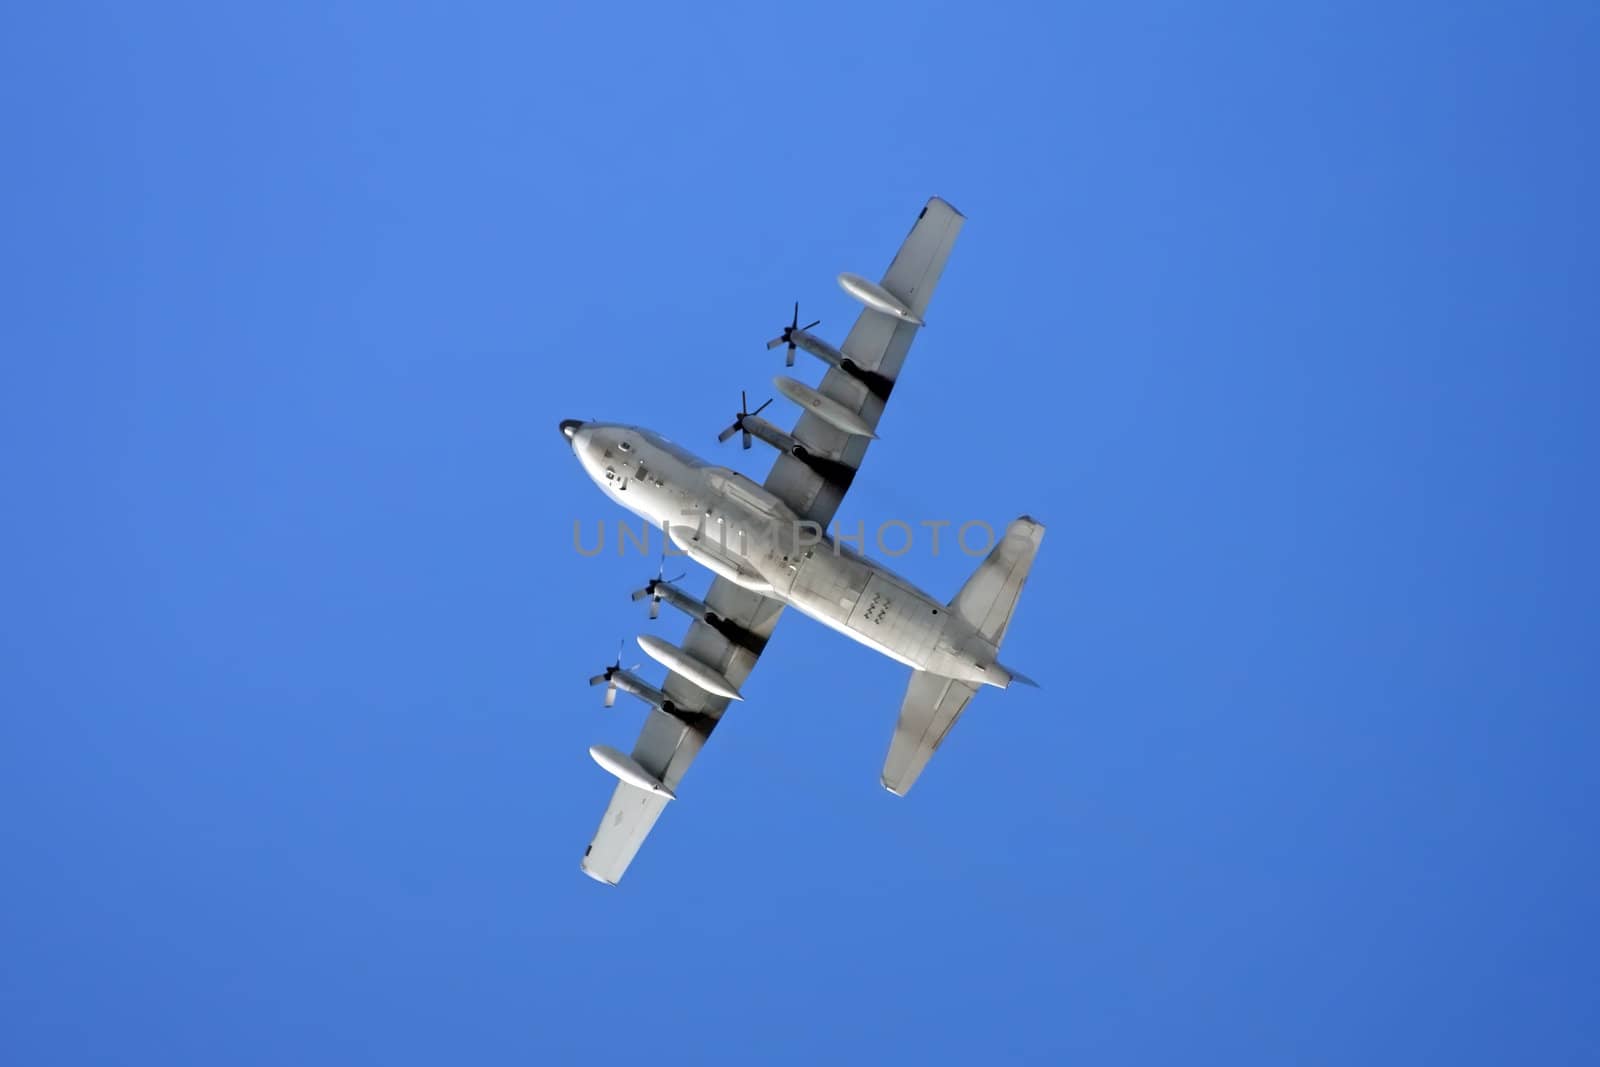 This image shows a German flying air force plane